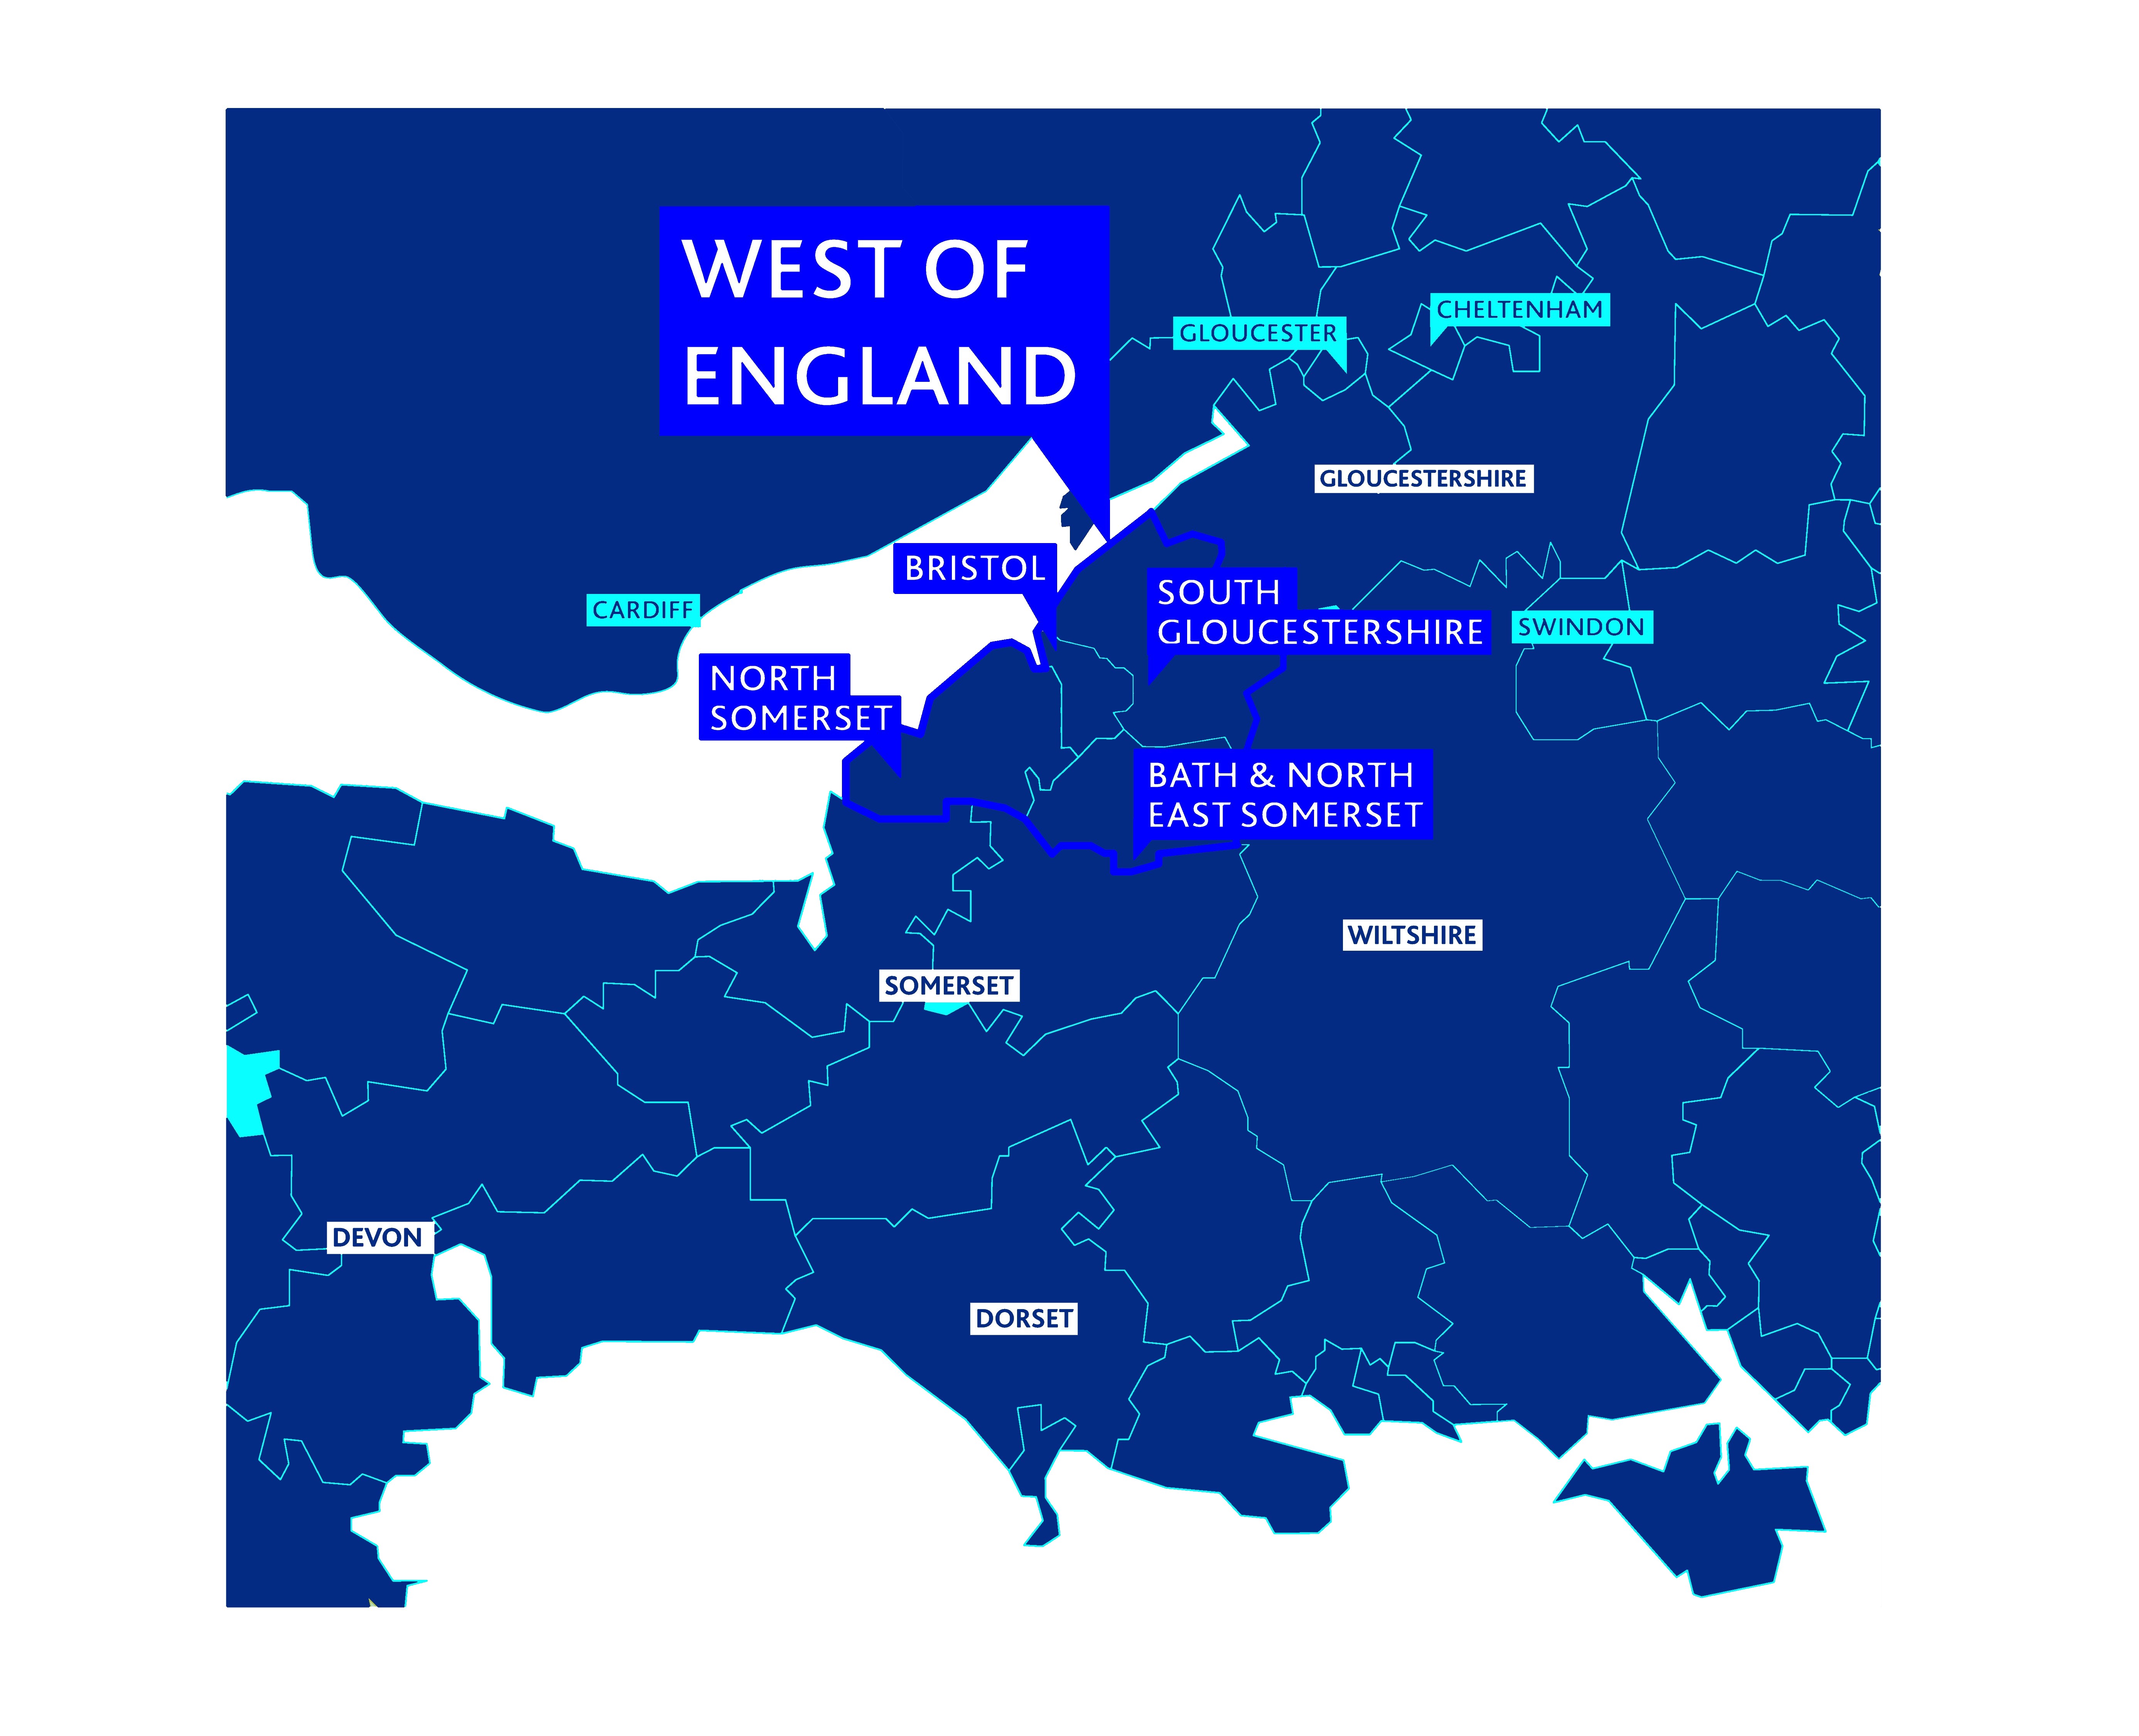 Image shows the region in the West of England, following the West of England LEP region, that the LSIP will be focusing on.